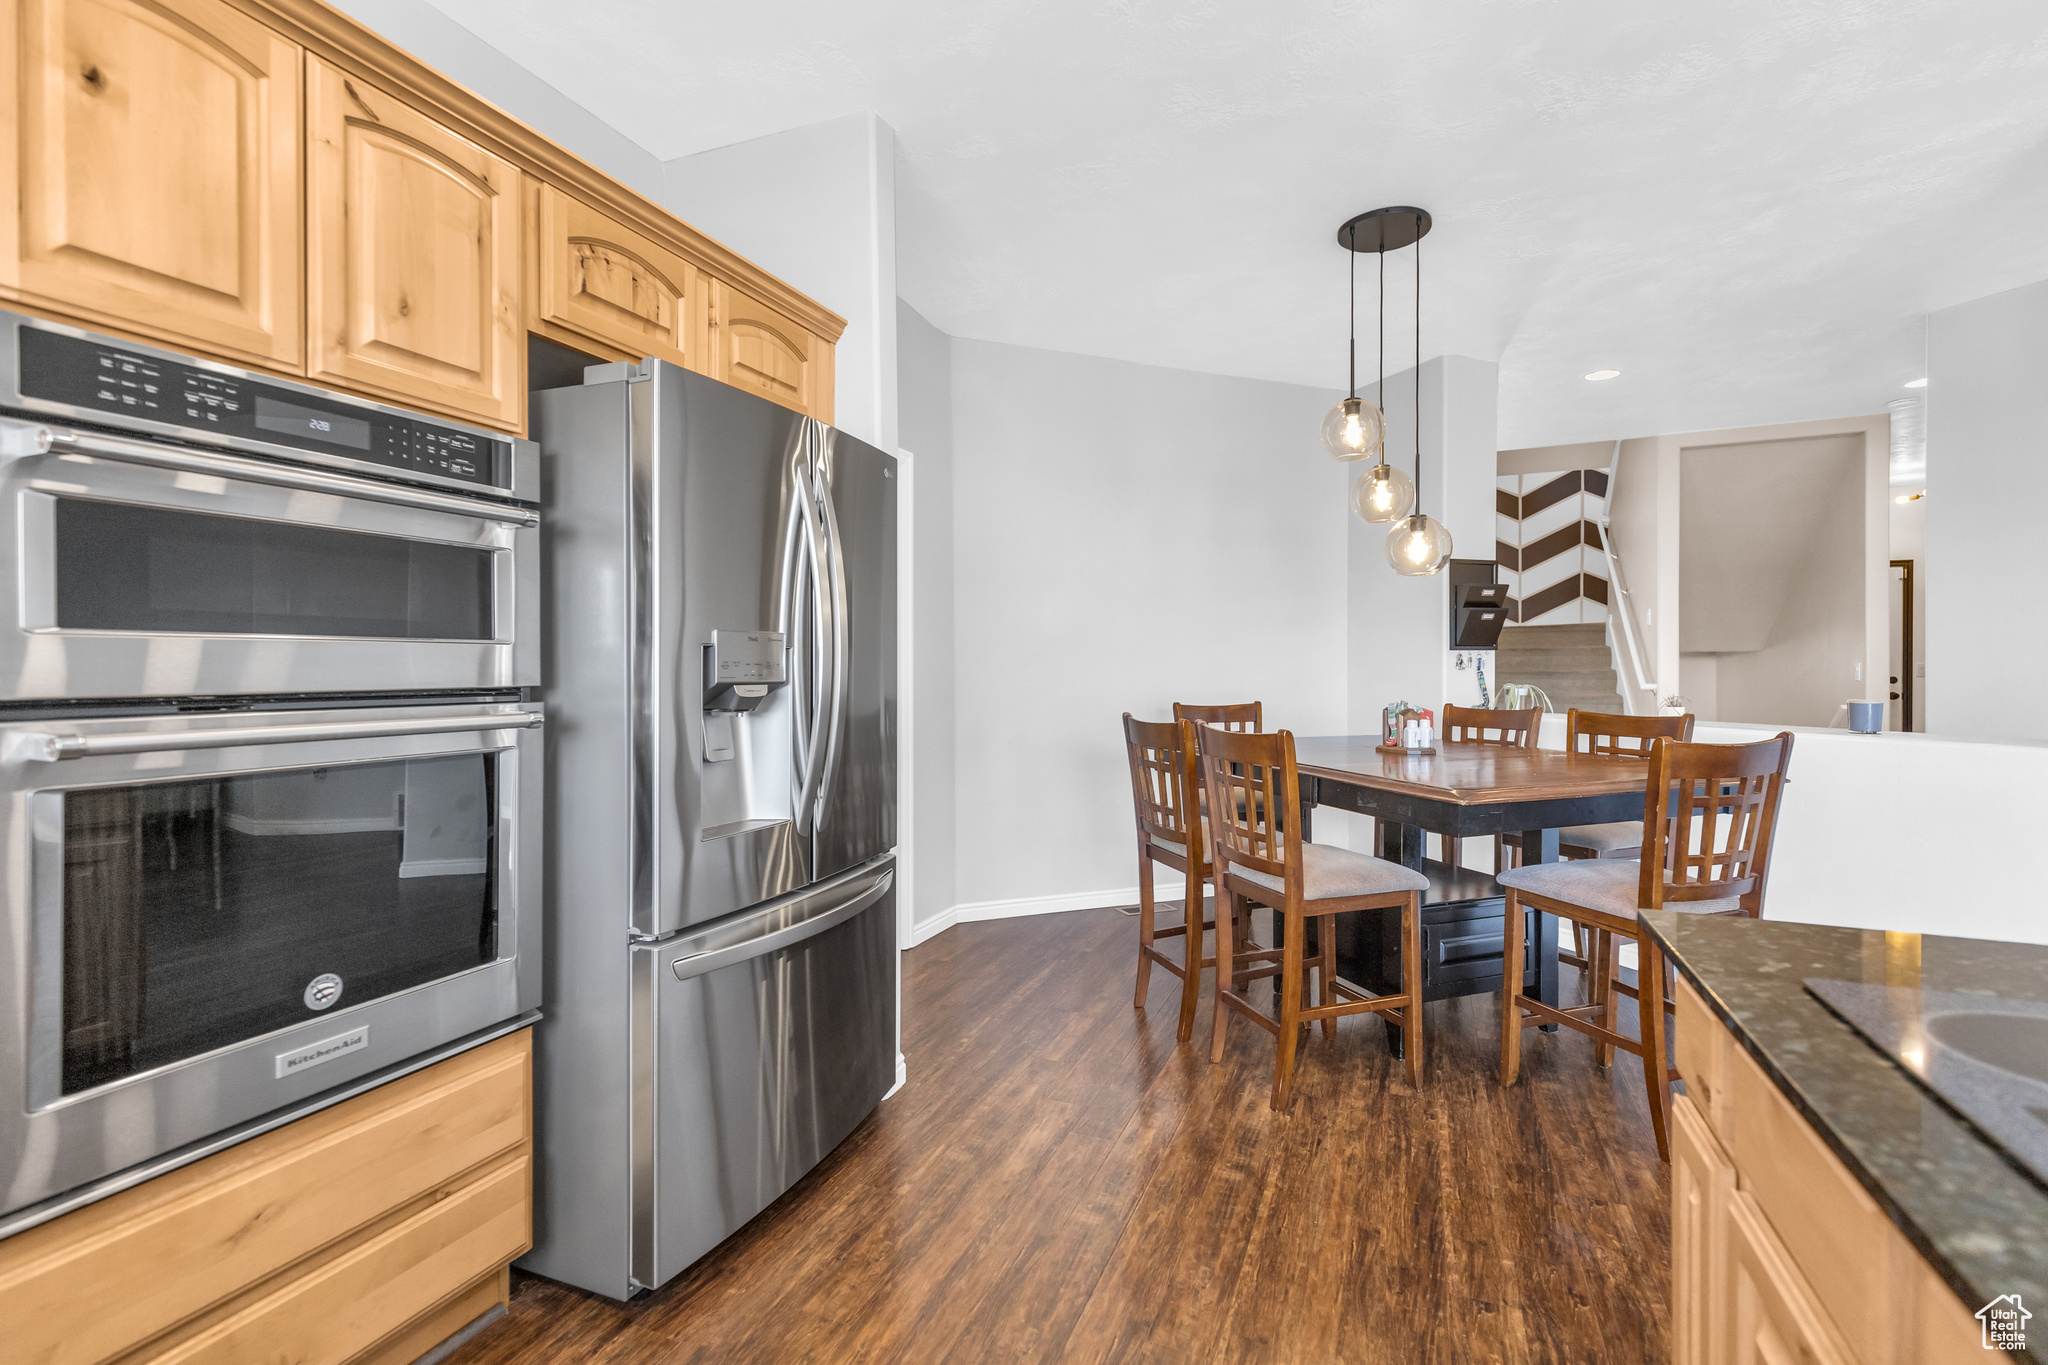 Kitchen featuring appliances with stainless steel finishes, dark hardwood / wood-style floors, dark stone countertops, light brown cabinetry, and pendant lighting